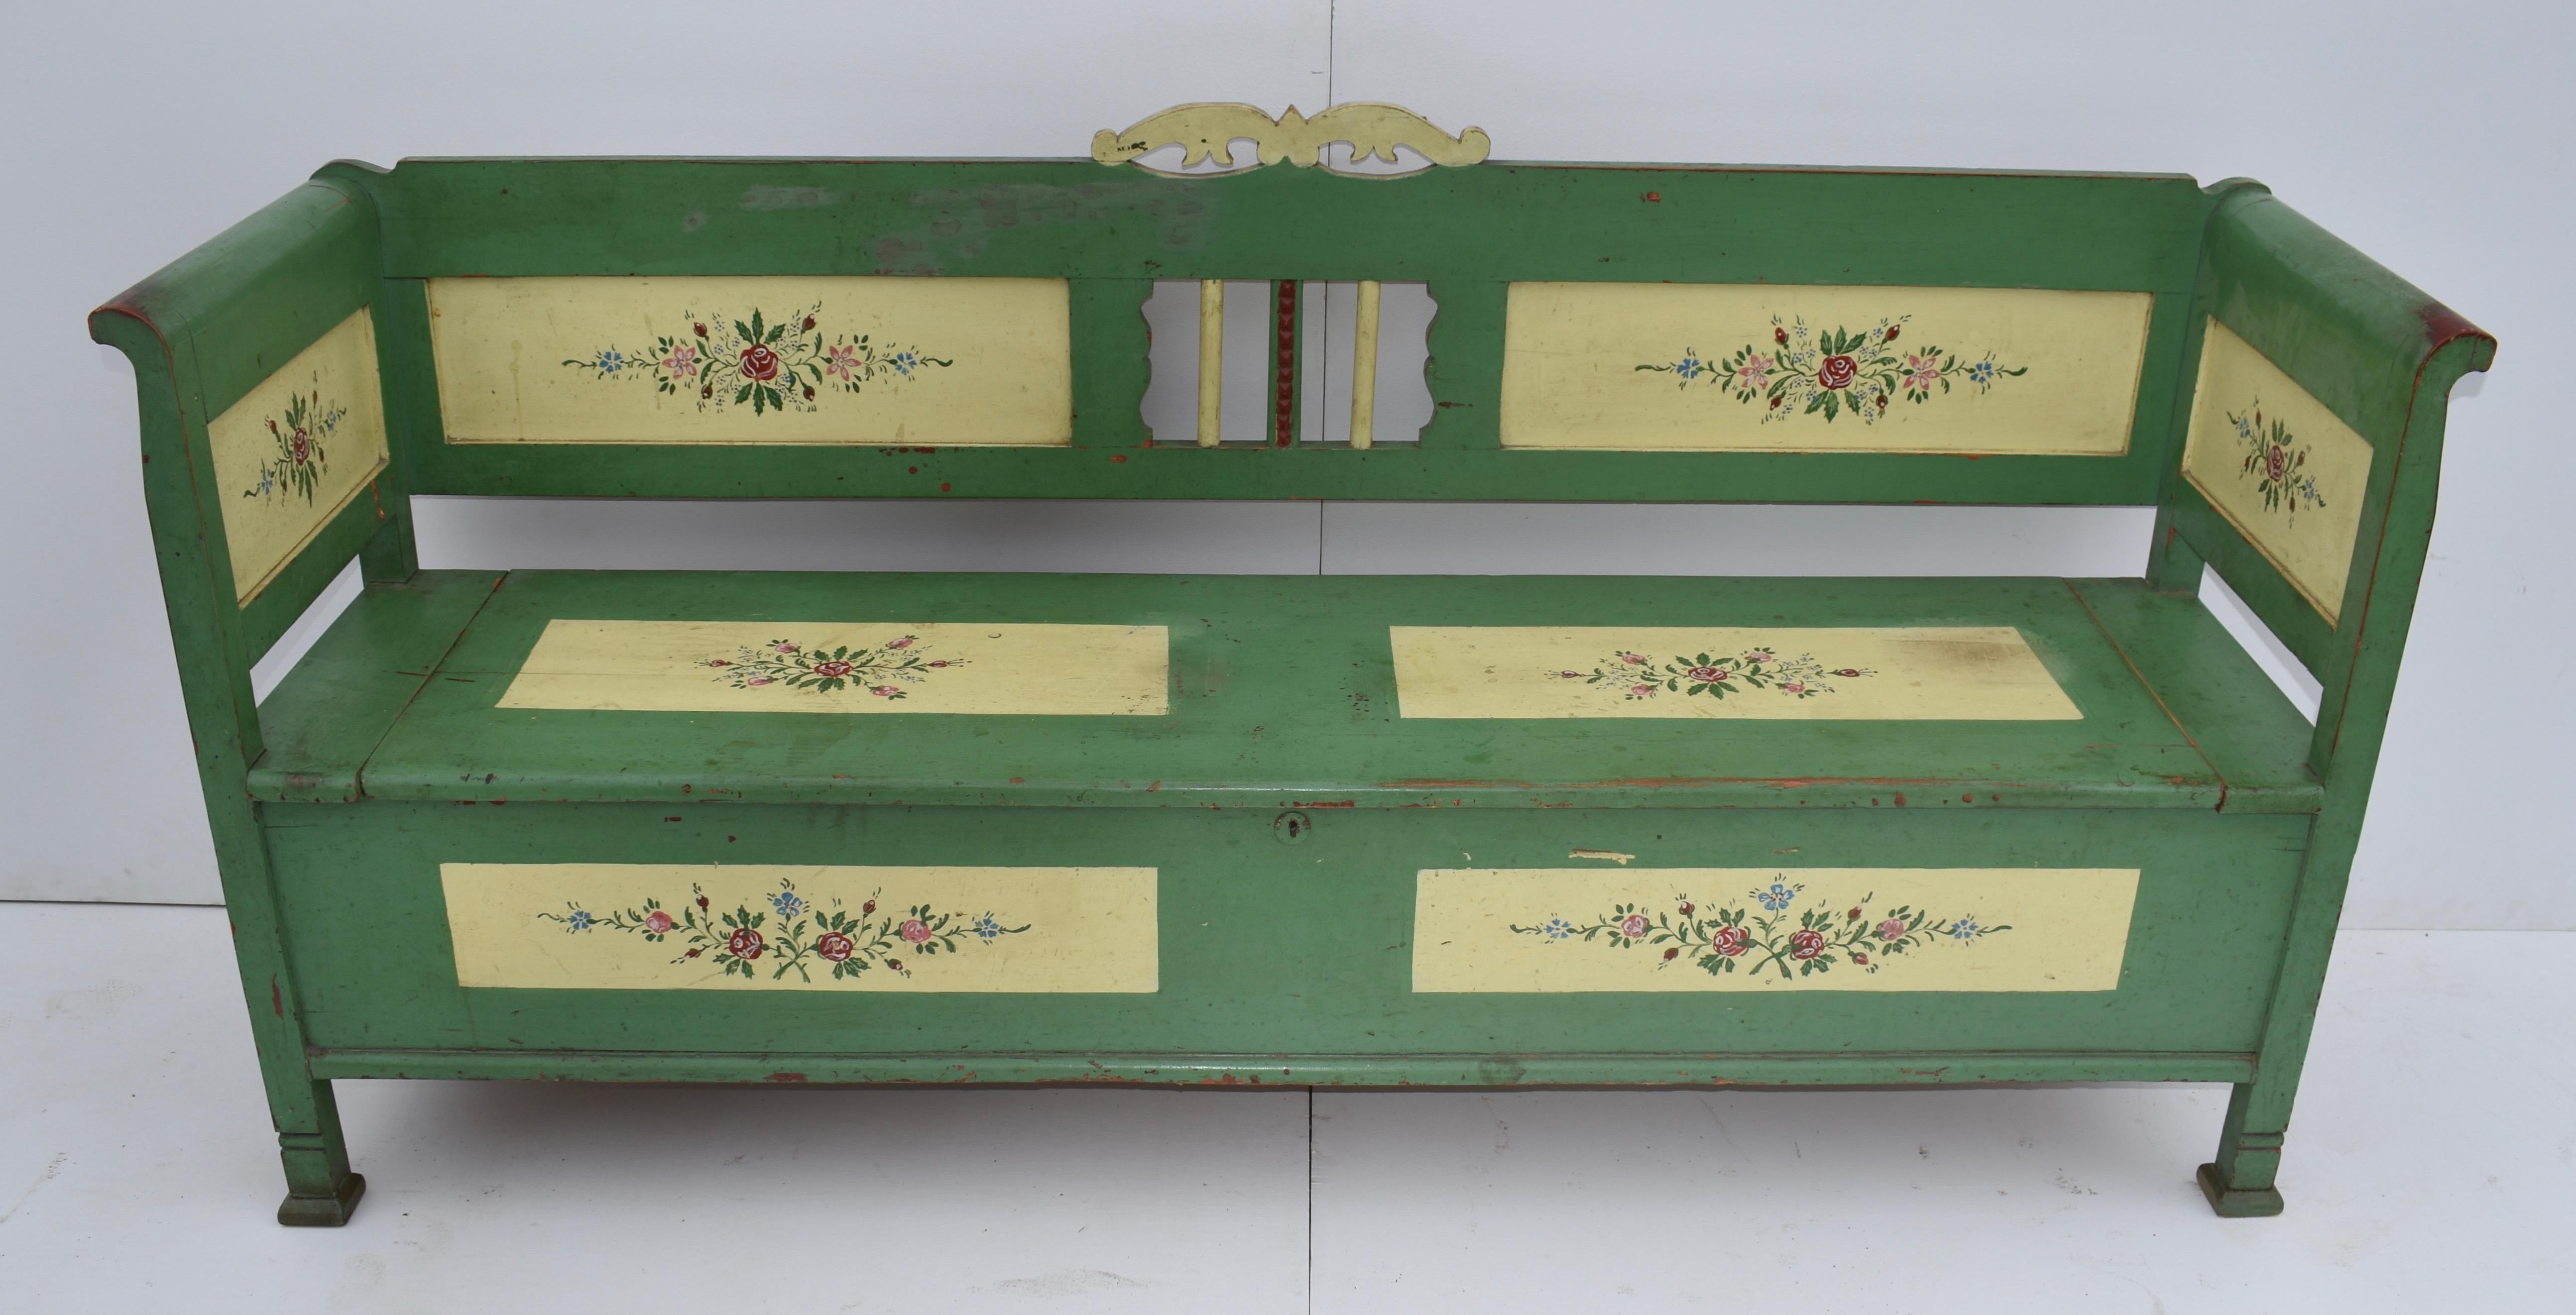 A fretwork crest mounts the back rail of this very clean, beautiful box bench, repainted with a green ground on red stain. Two flat panels with recently executed folk art floral decoration flank a central opening with three spindles, the centre one